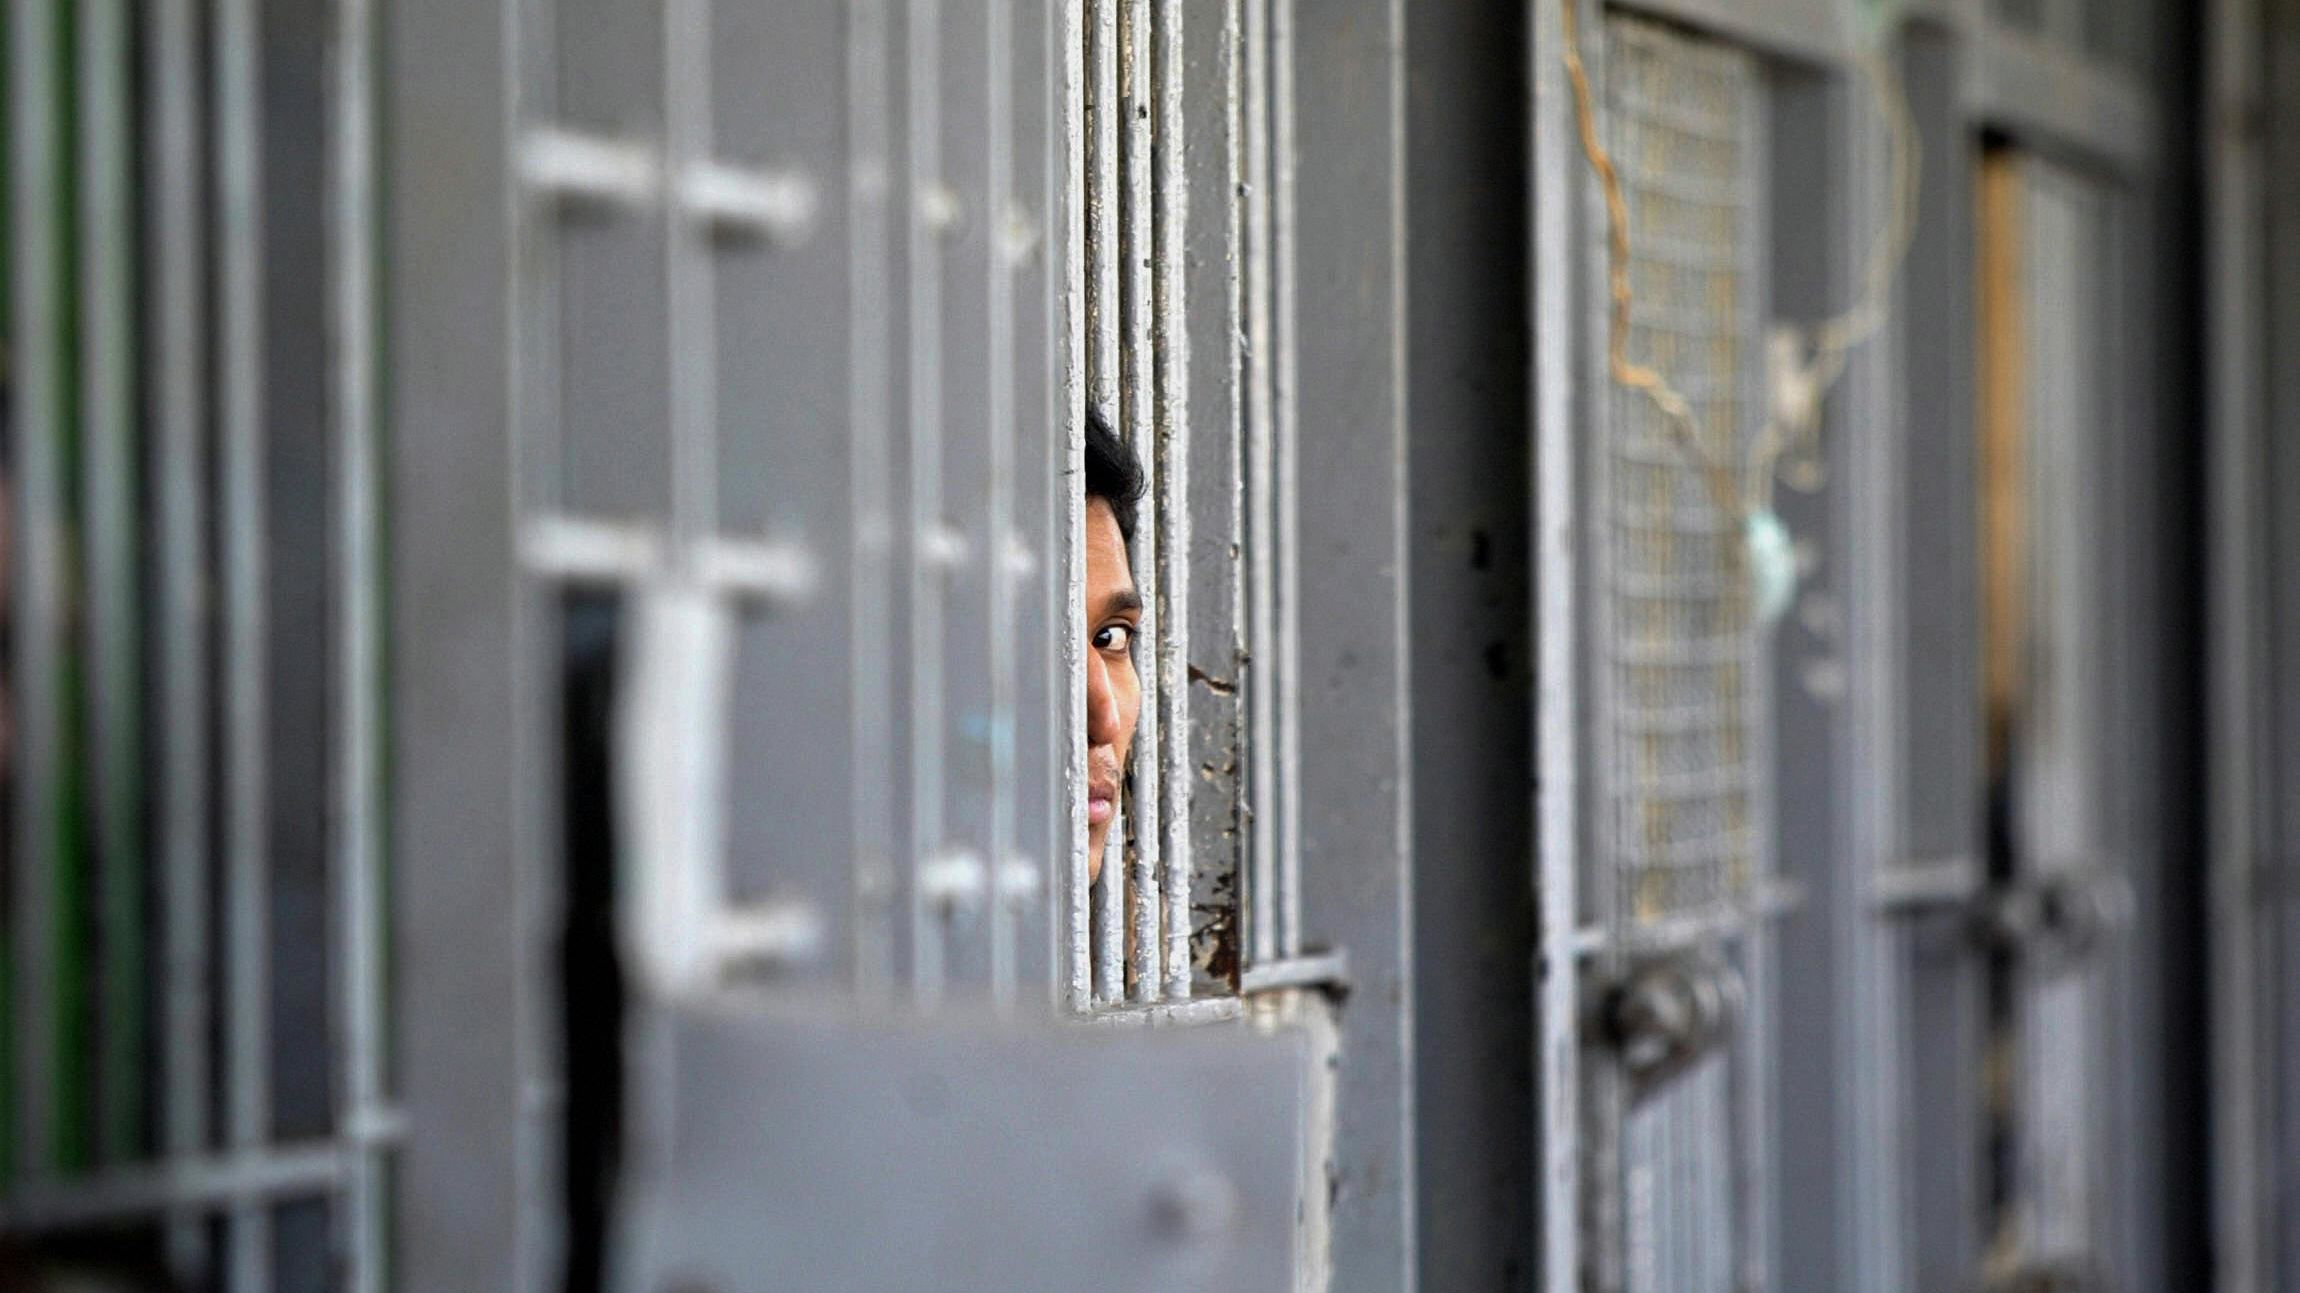 An inmate peers through the bars of a cell at the Federal District Penitentiary in Mexico City.